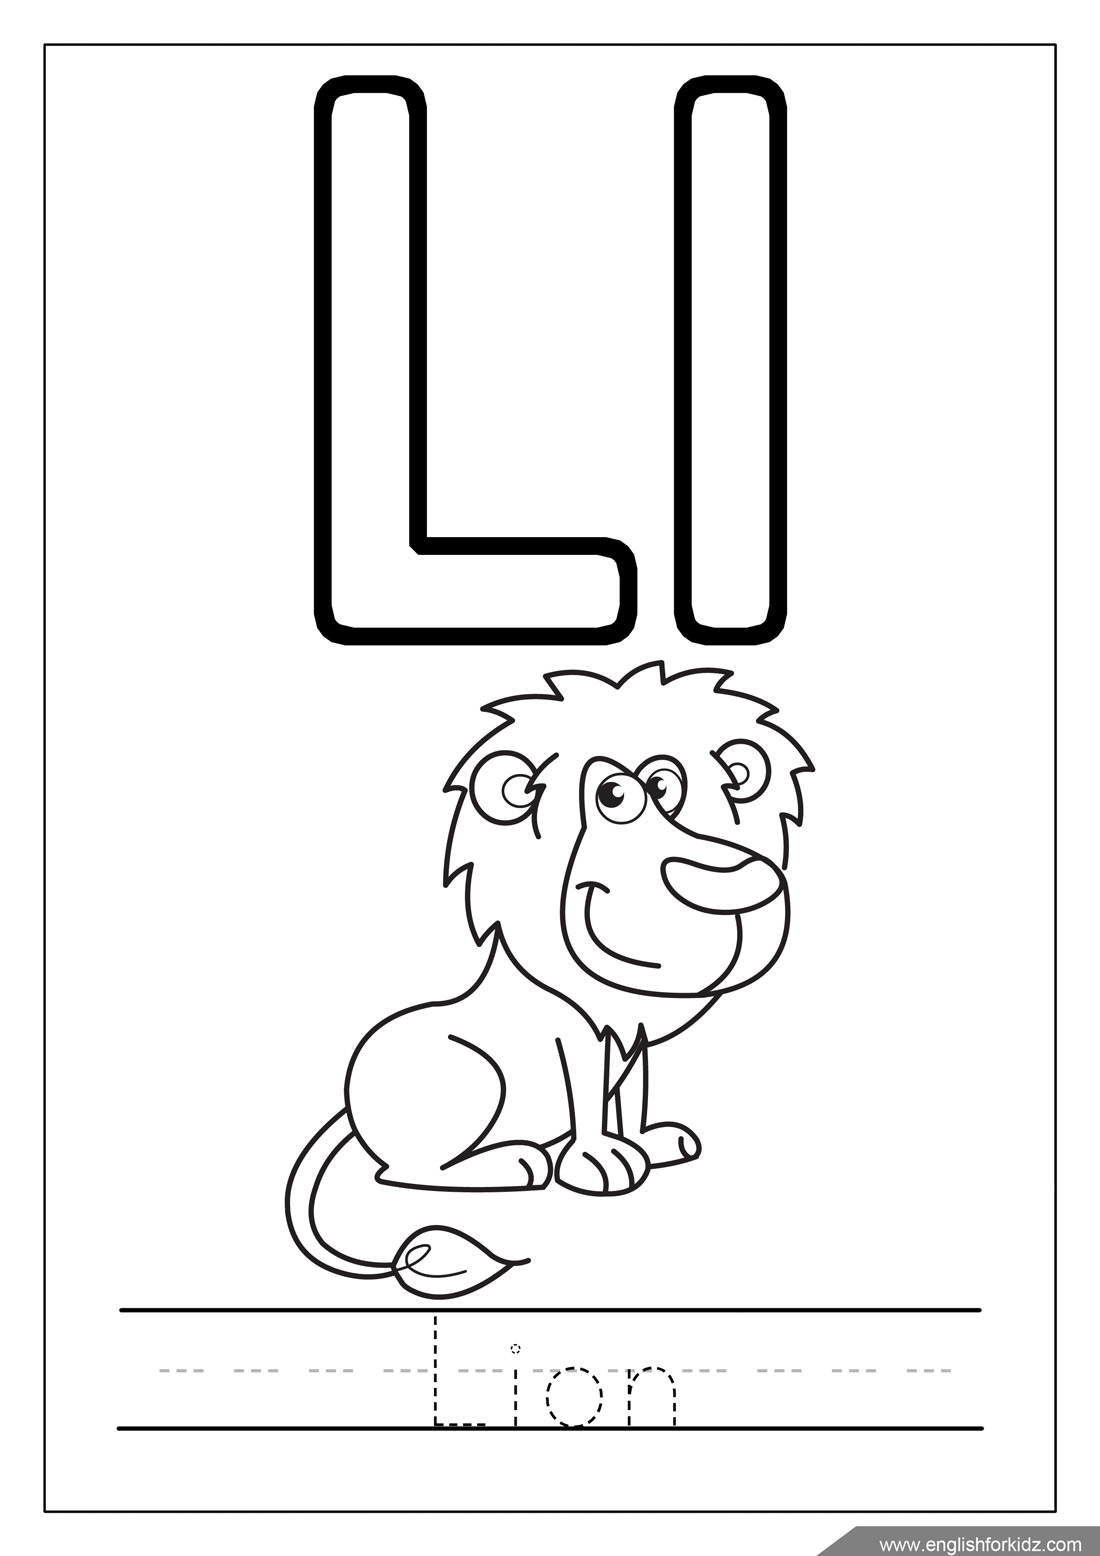 Download English for Kids Step by Step: Alphabet Coloring Pages (Letters K - T)